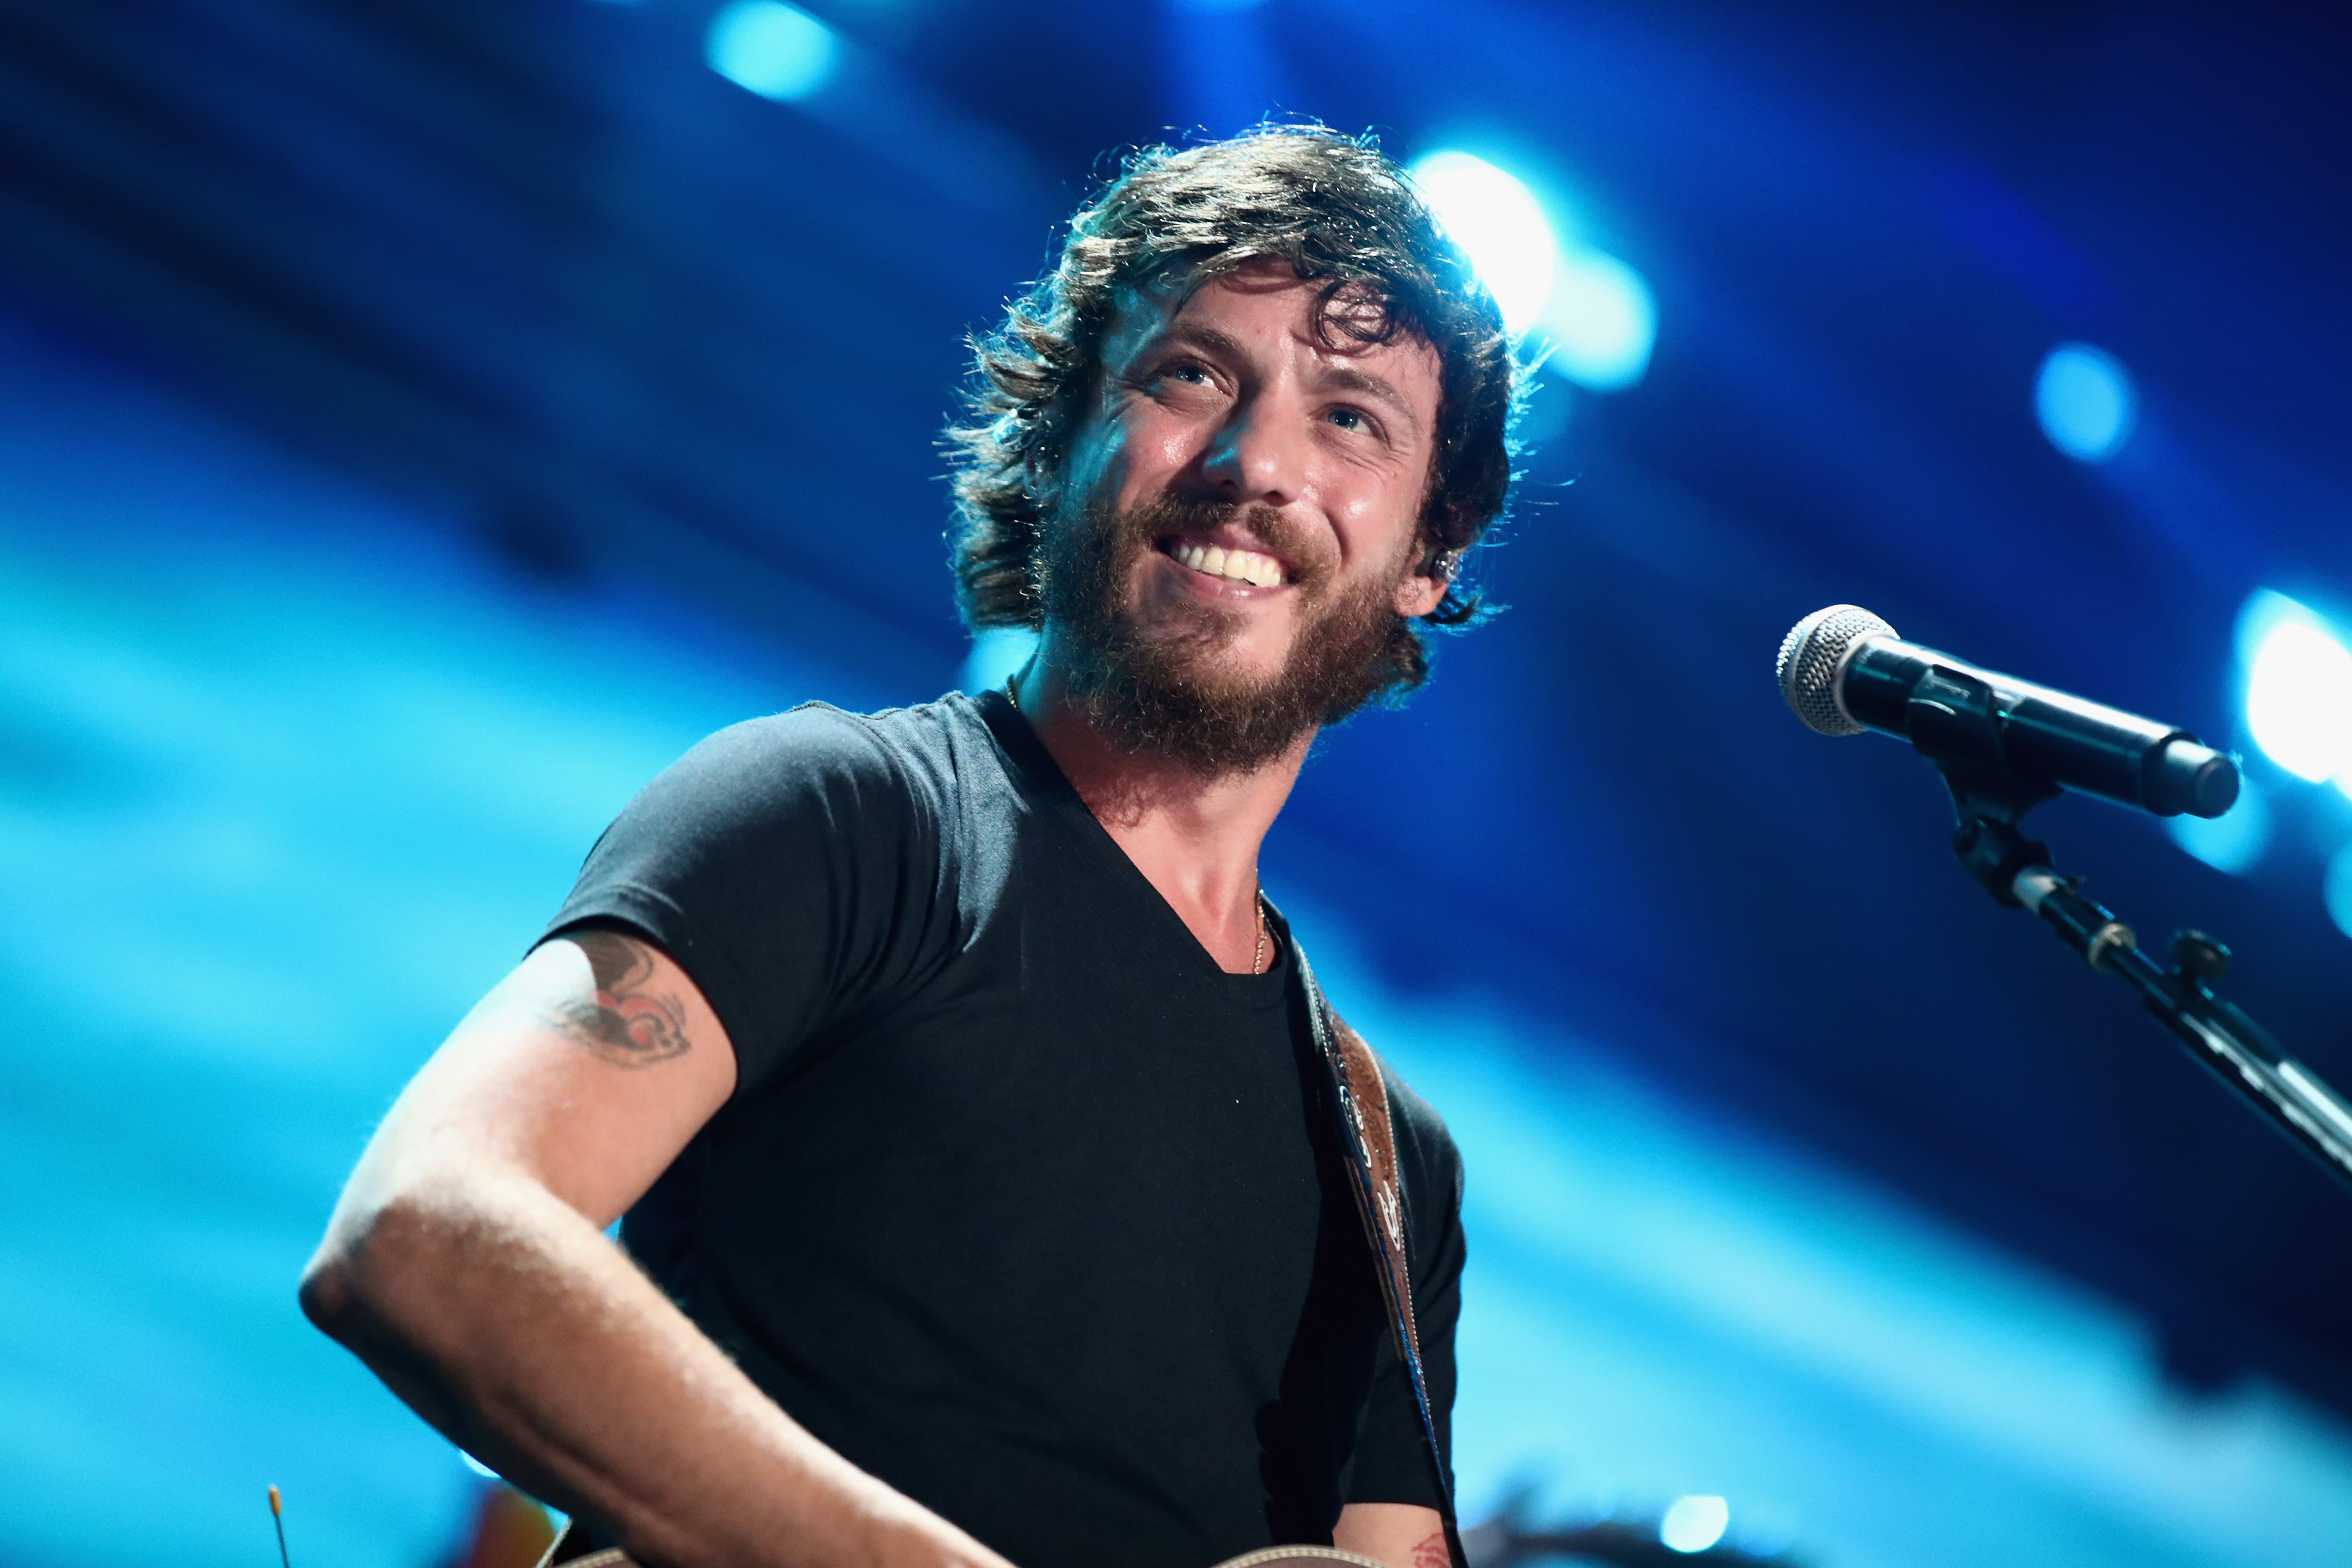 Chris Janson is All For Spreading “Good Vibes” with New Music